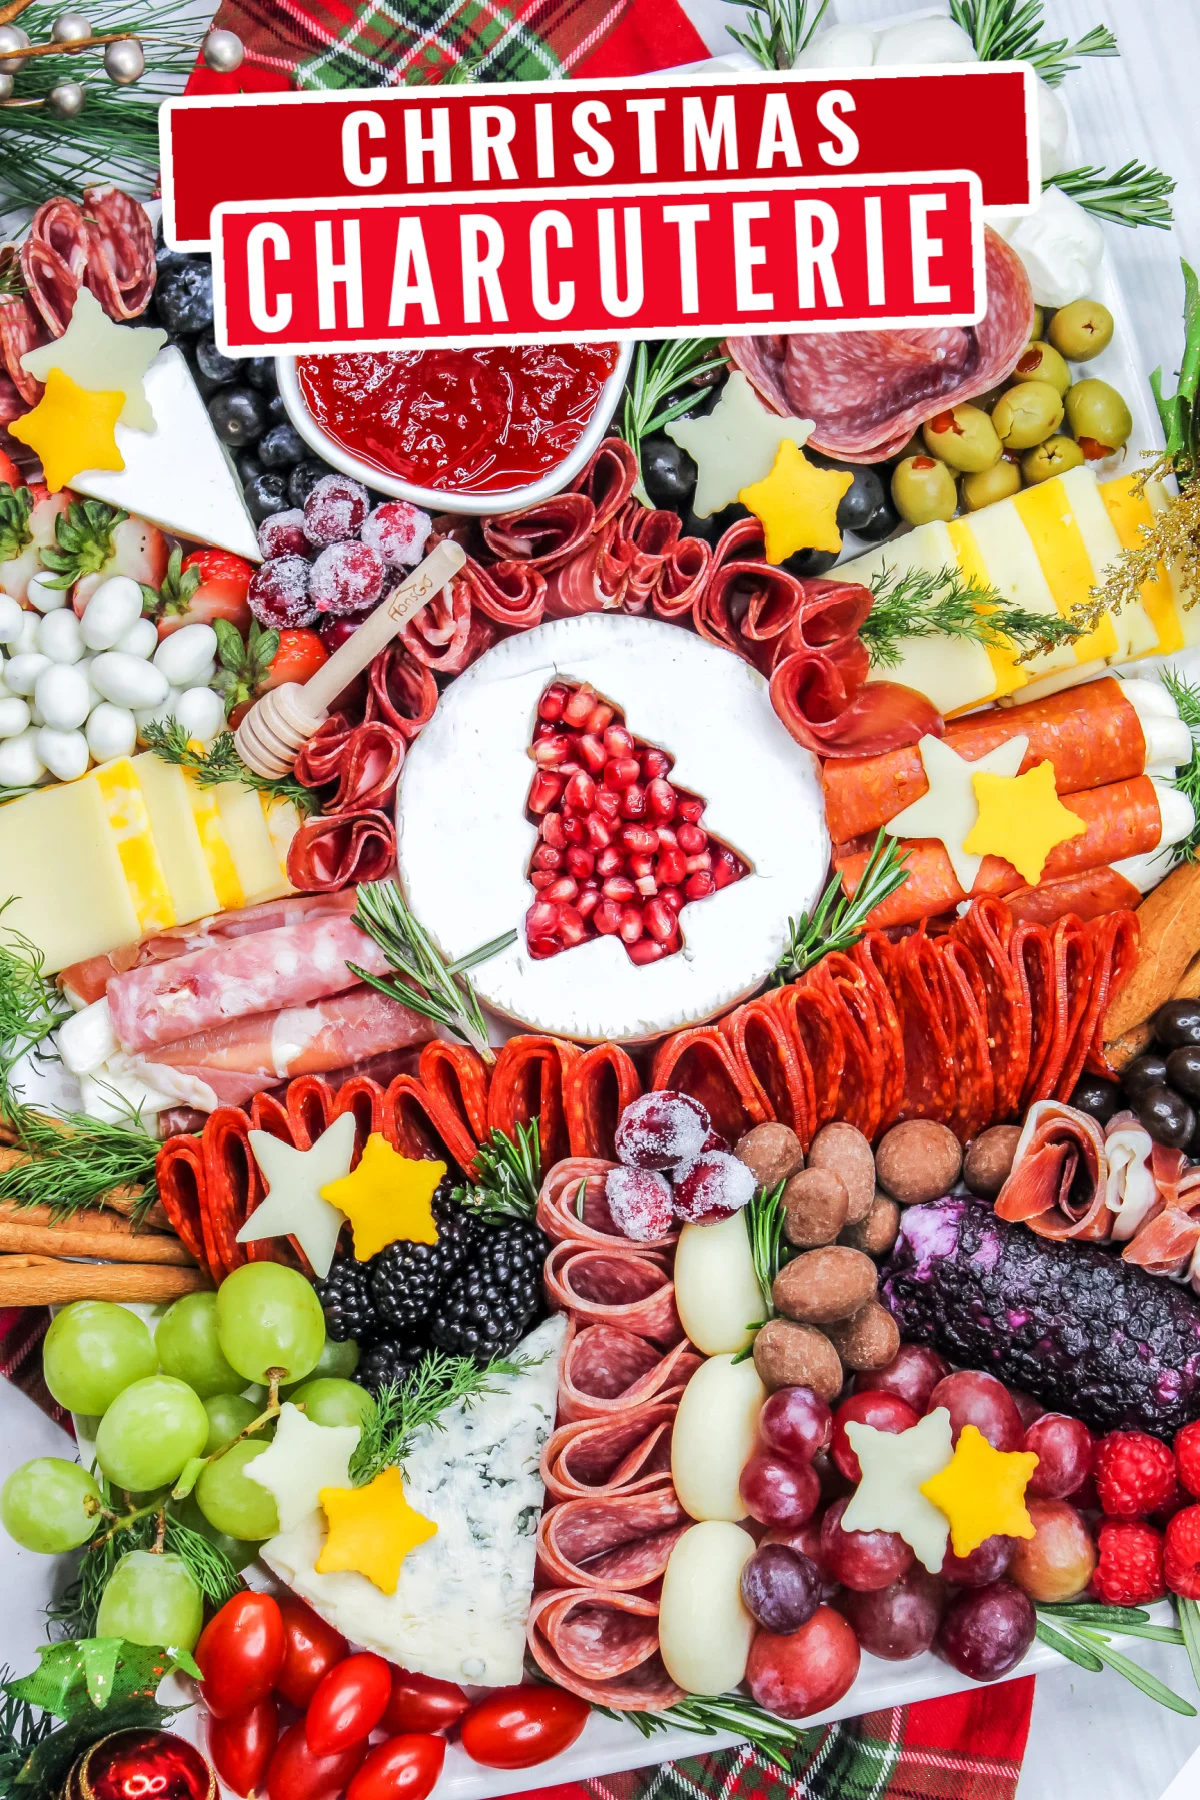 Looking for a delicious and easy Christmas appetizer? This detailed Christmas charcuterie board recipe is perfect for your holiday party!